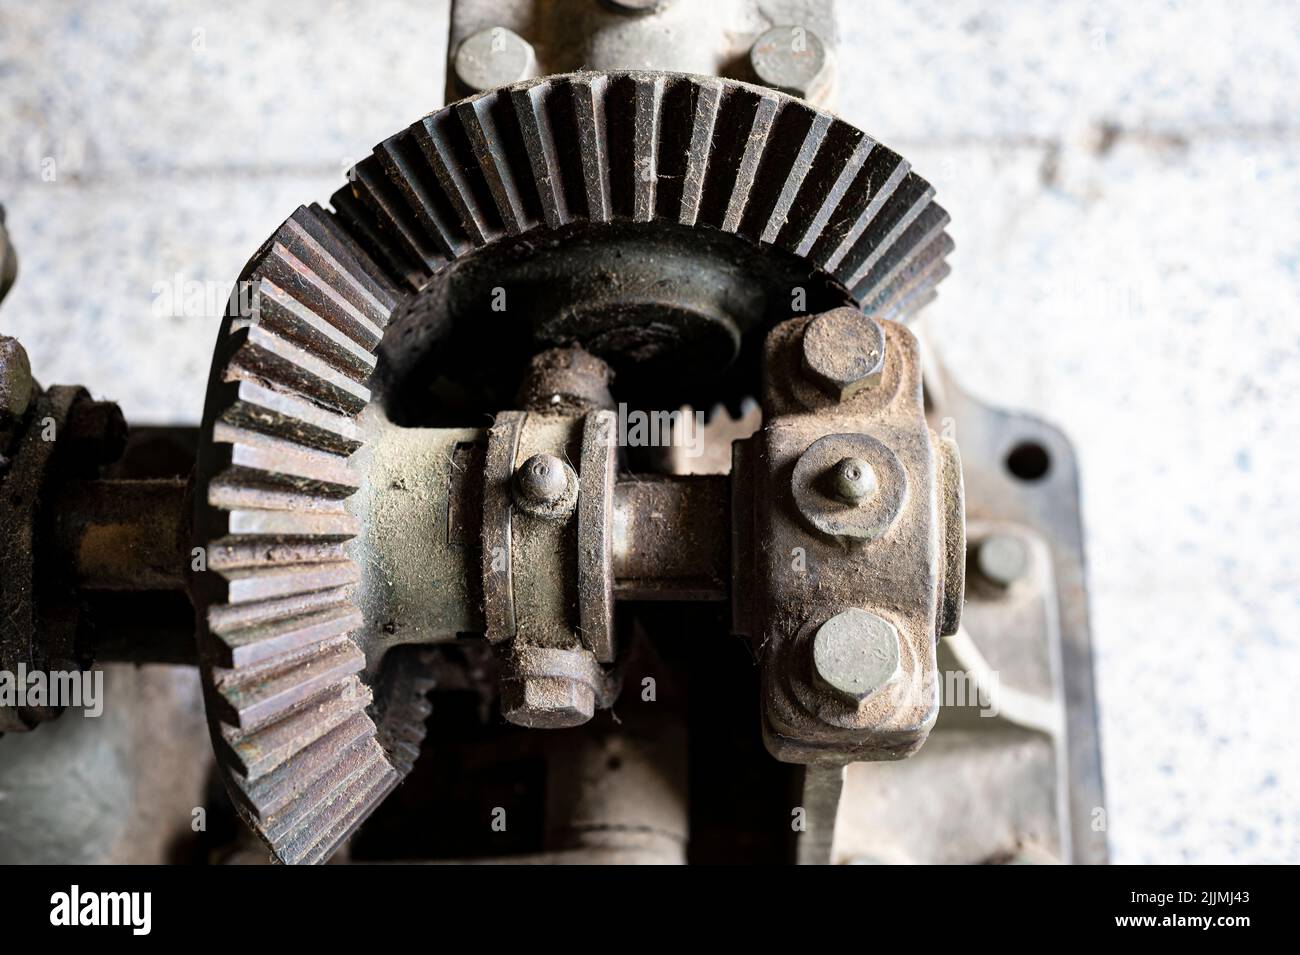 A perpendicular transmission of gears and pinions. Stock Photo